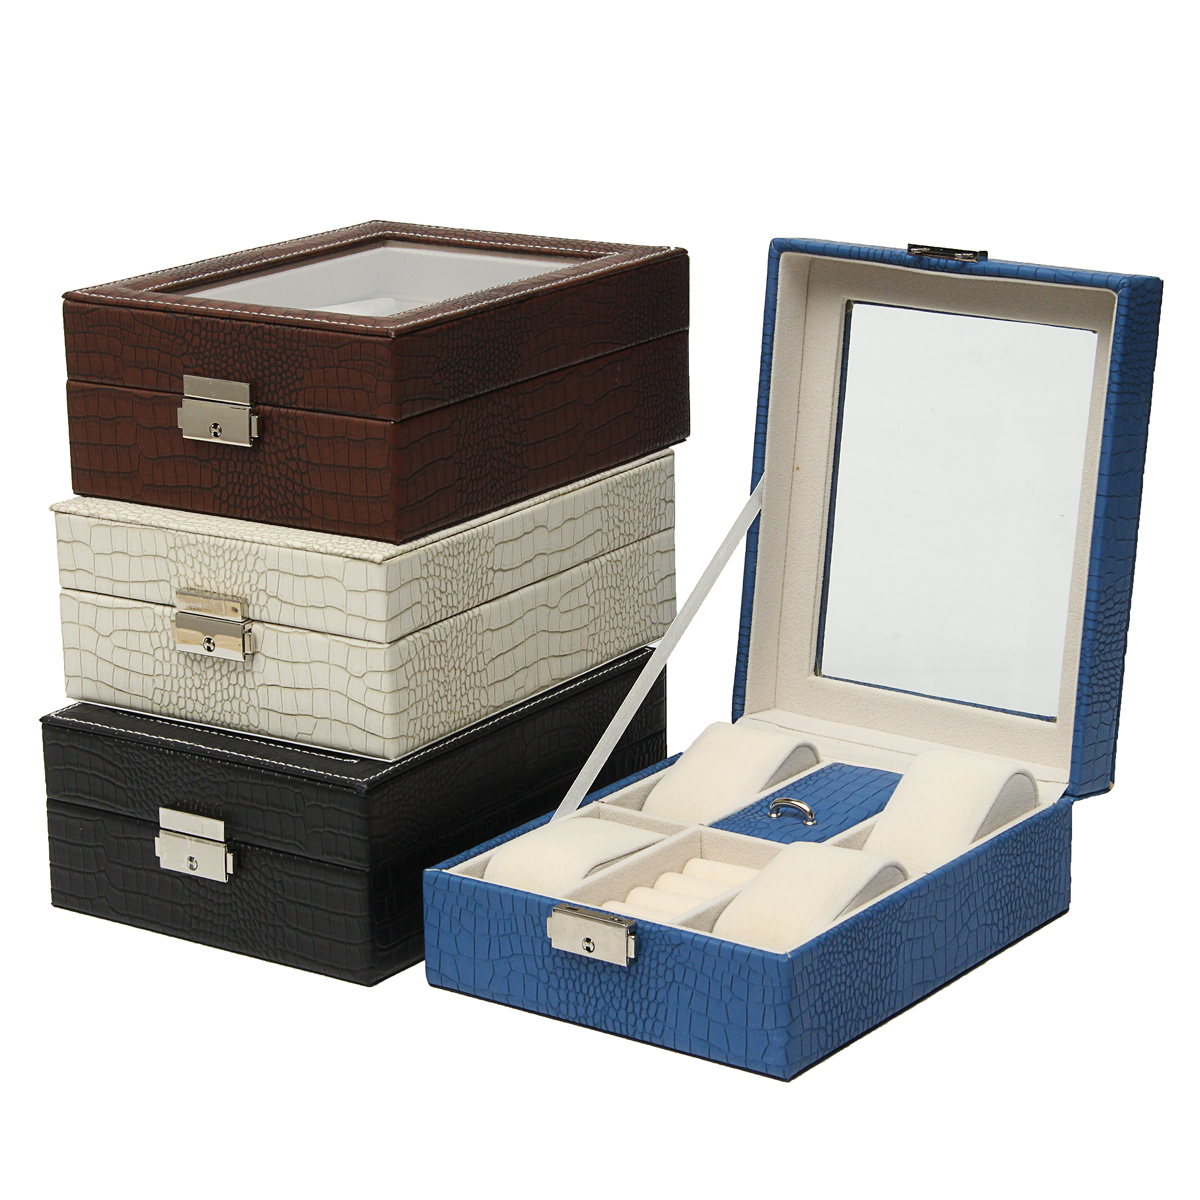 Leather-Display-Case-Organizer-Acrylic-Collection-Box-for-Storage-Watch-Jewelry-1212472-2